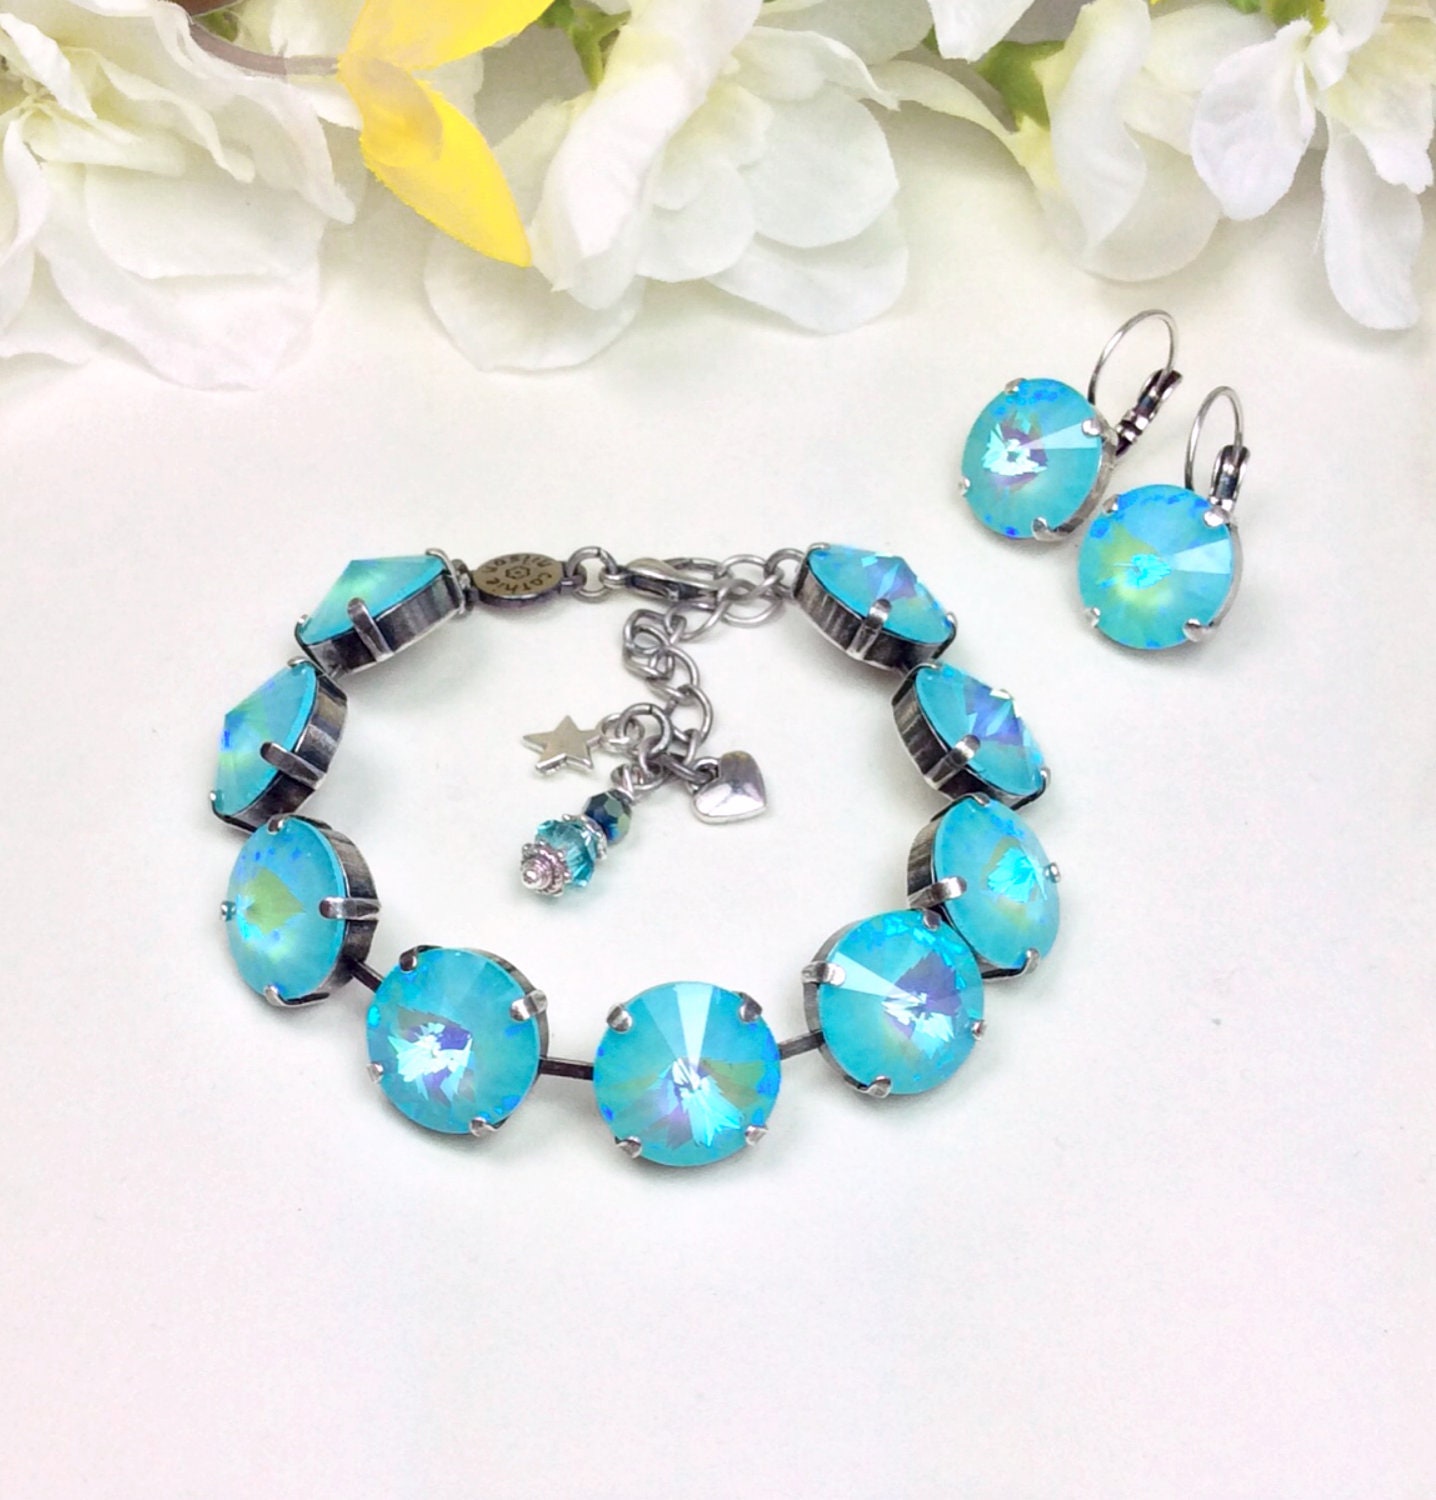 Swarovski Crystal Bracelet and Earrings- 14MM Radiant Ultra Turquoise A B Crystals - Gorgeous for Summer! Sparkle & Shimmer - FREE SHIPPING